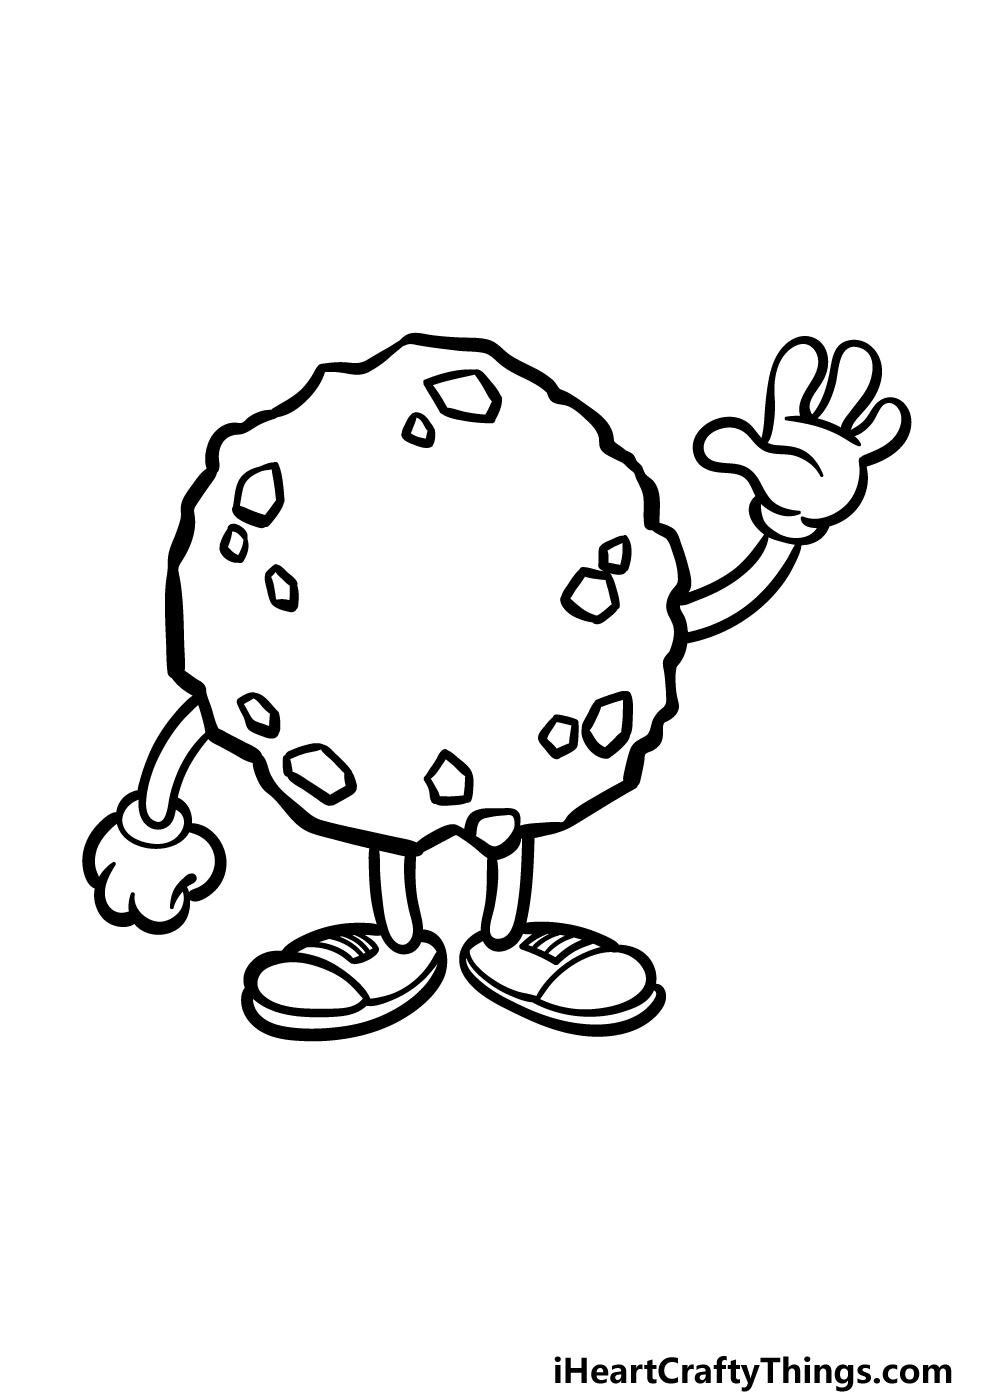 how to draw a cartoon cookie step 4